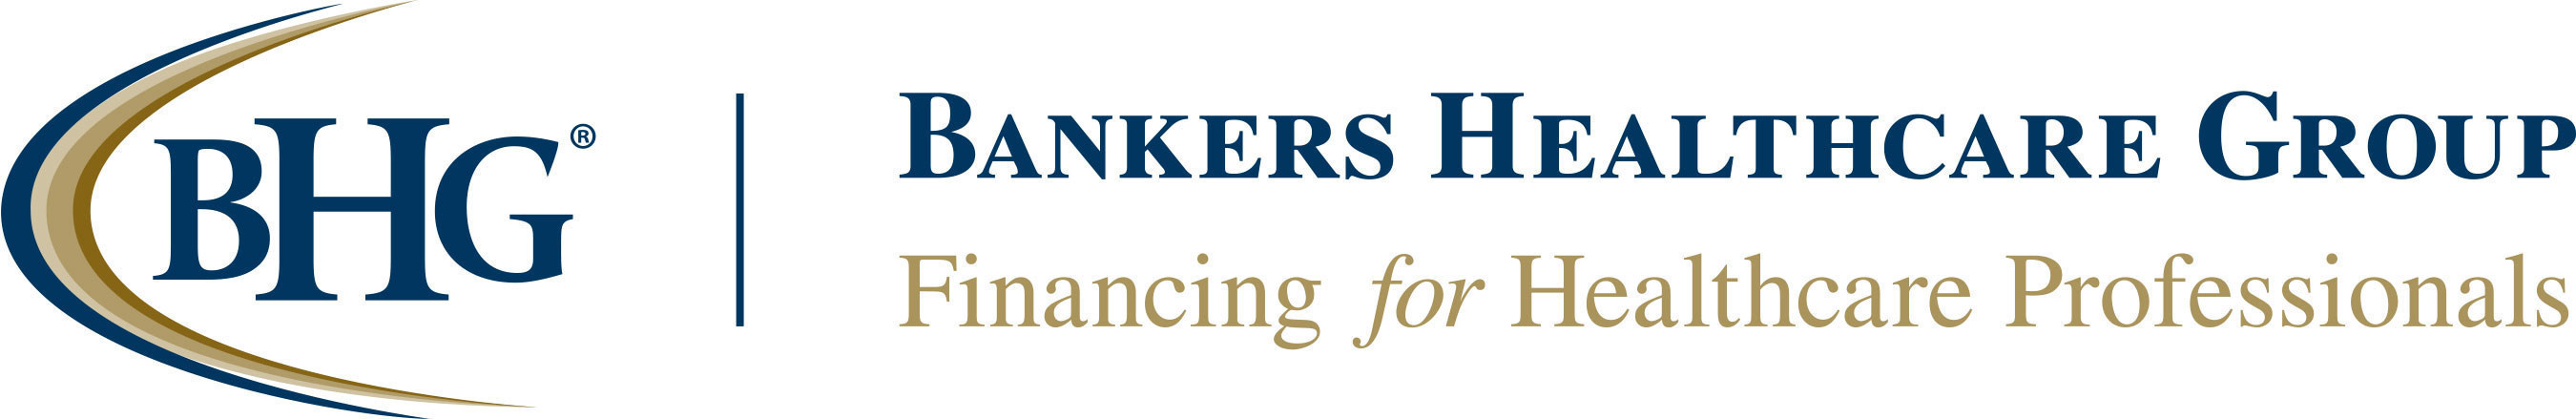 Bankers Healthcare Group, the leading provider of financing solutions for healthcare professionals since 2001.